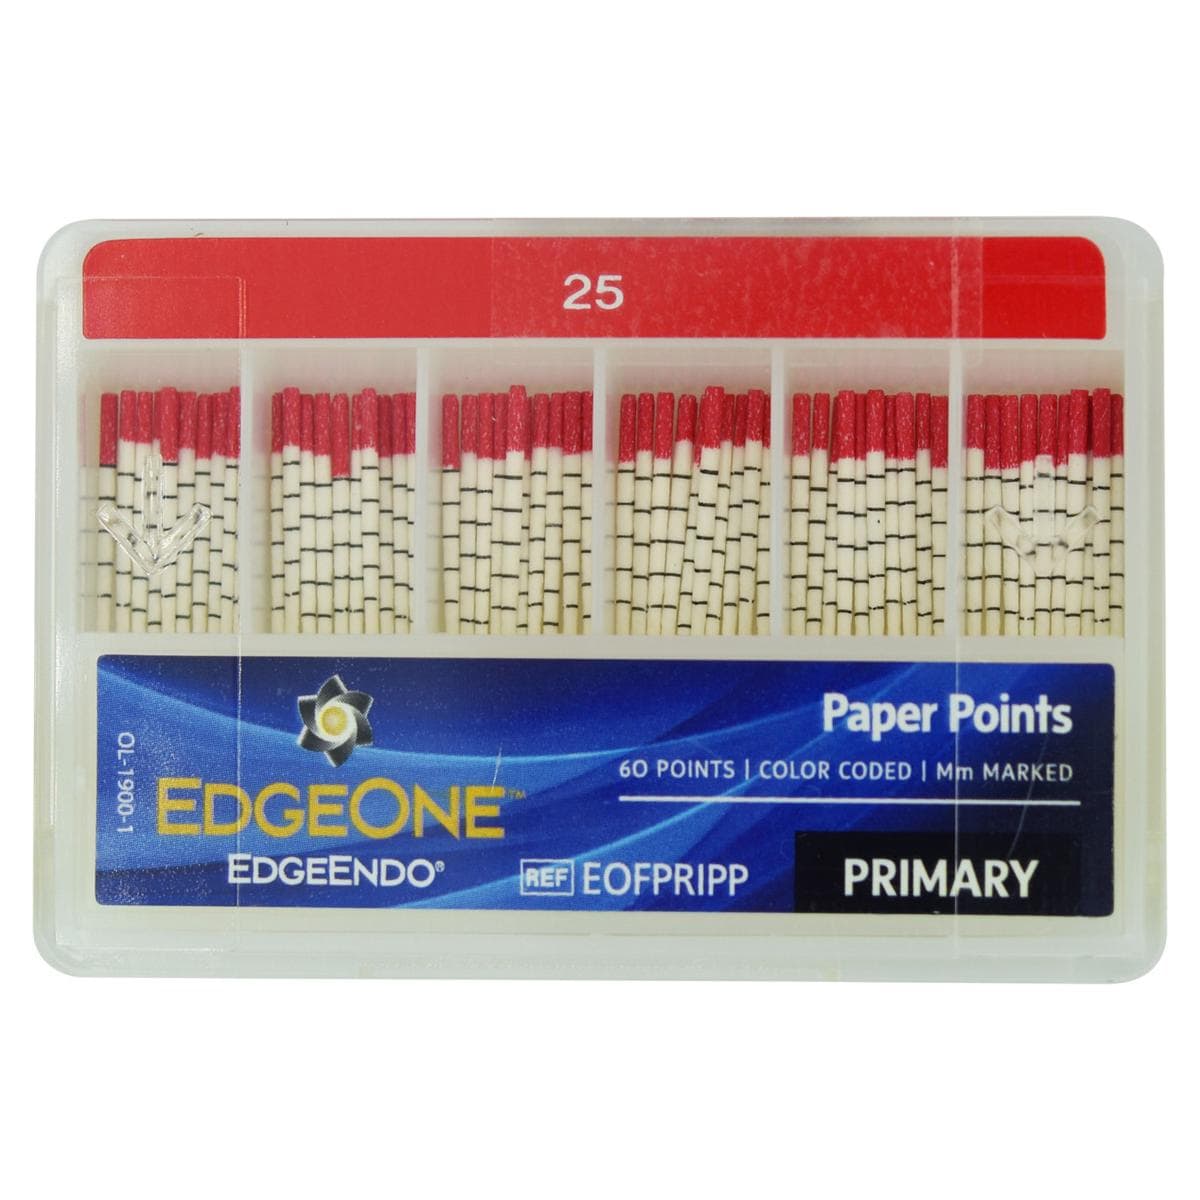 EdgeOne Fire Paper Point - Primary, 60 pcs